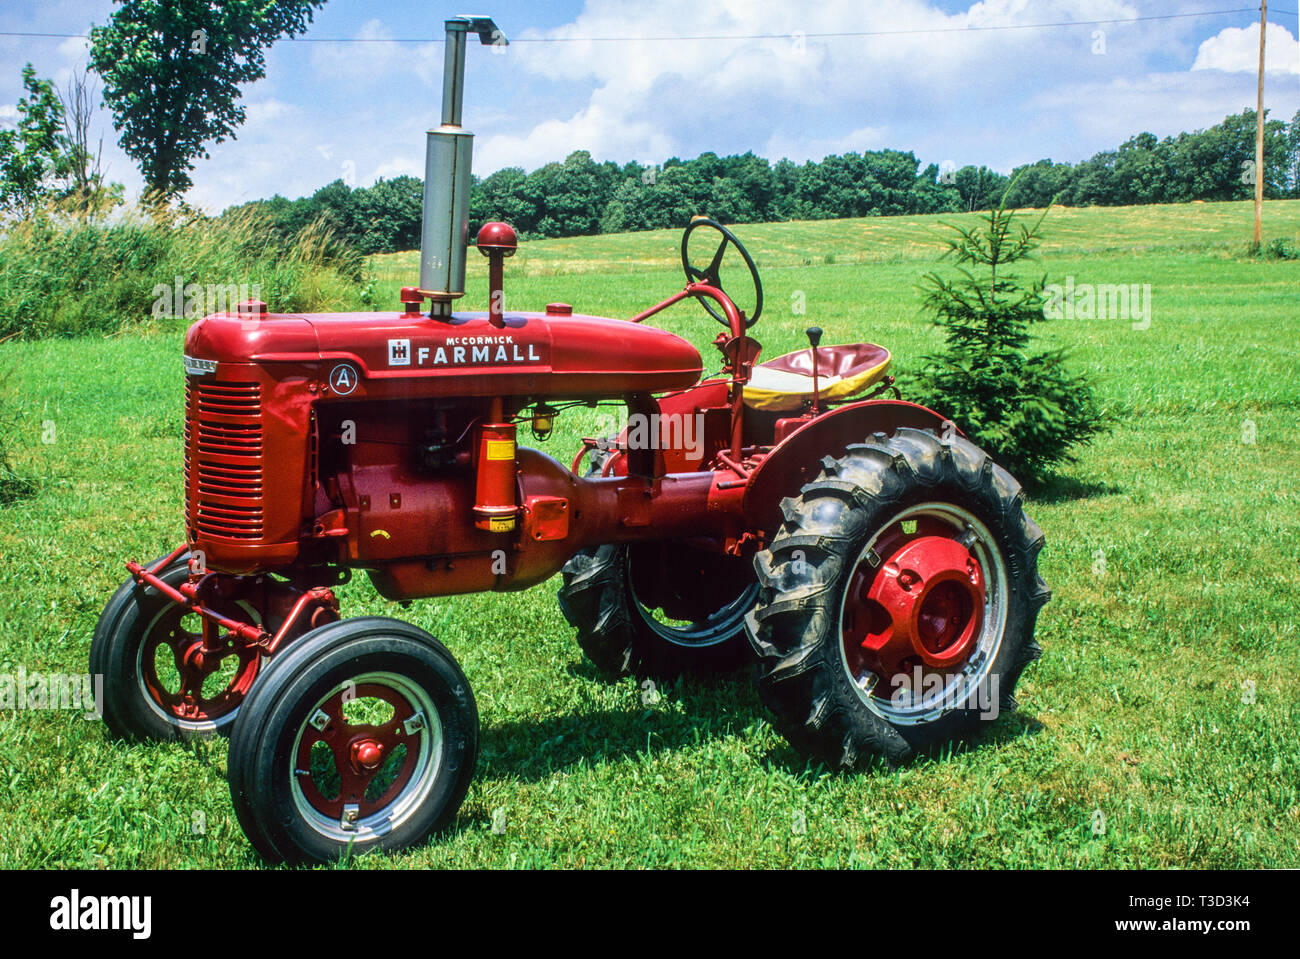 Vintage restored Mc Cormick Farmall tractor, Steuben County, New York, USA, vintage tractors spring antique images garden tool restored Stock Photo